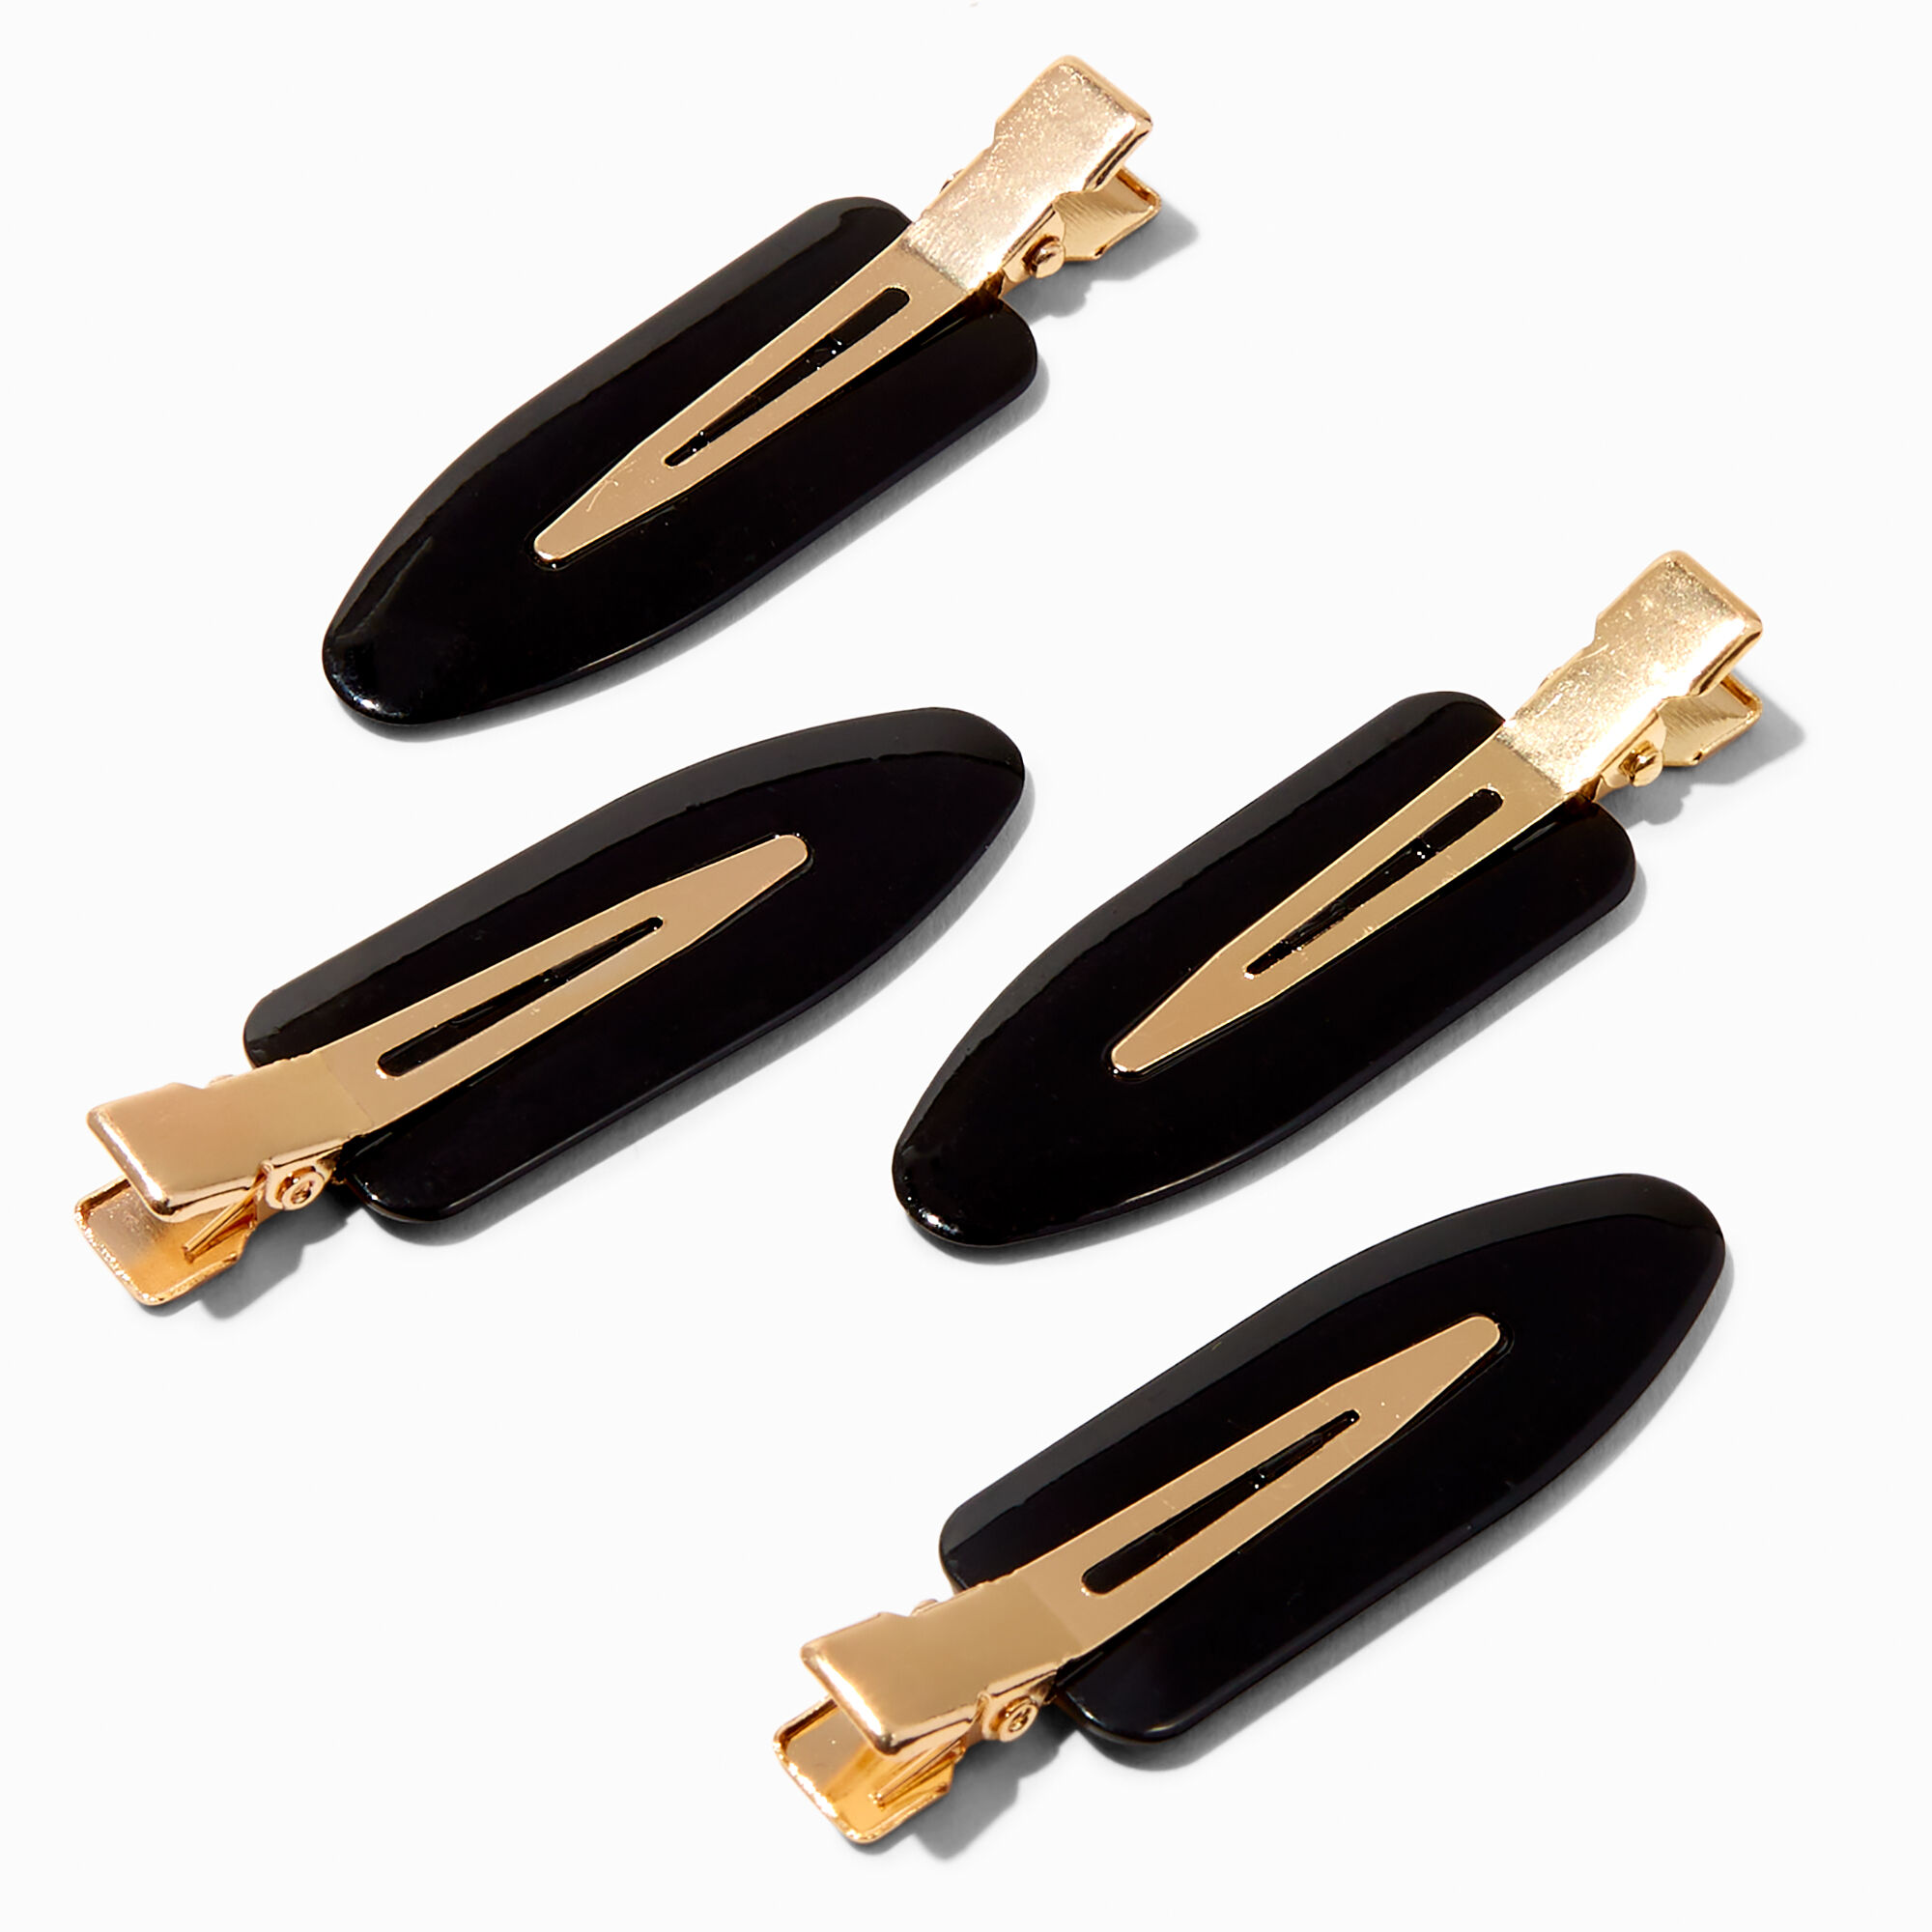 View Claires Gold No Crease Hair Styling Clips 4 Pack Black information